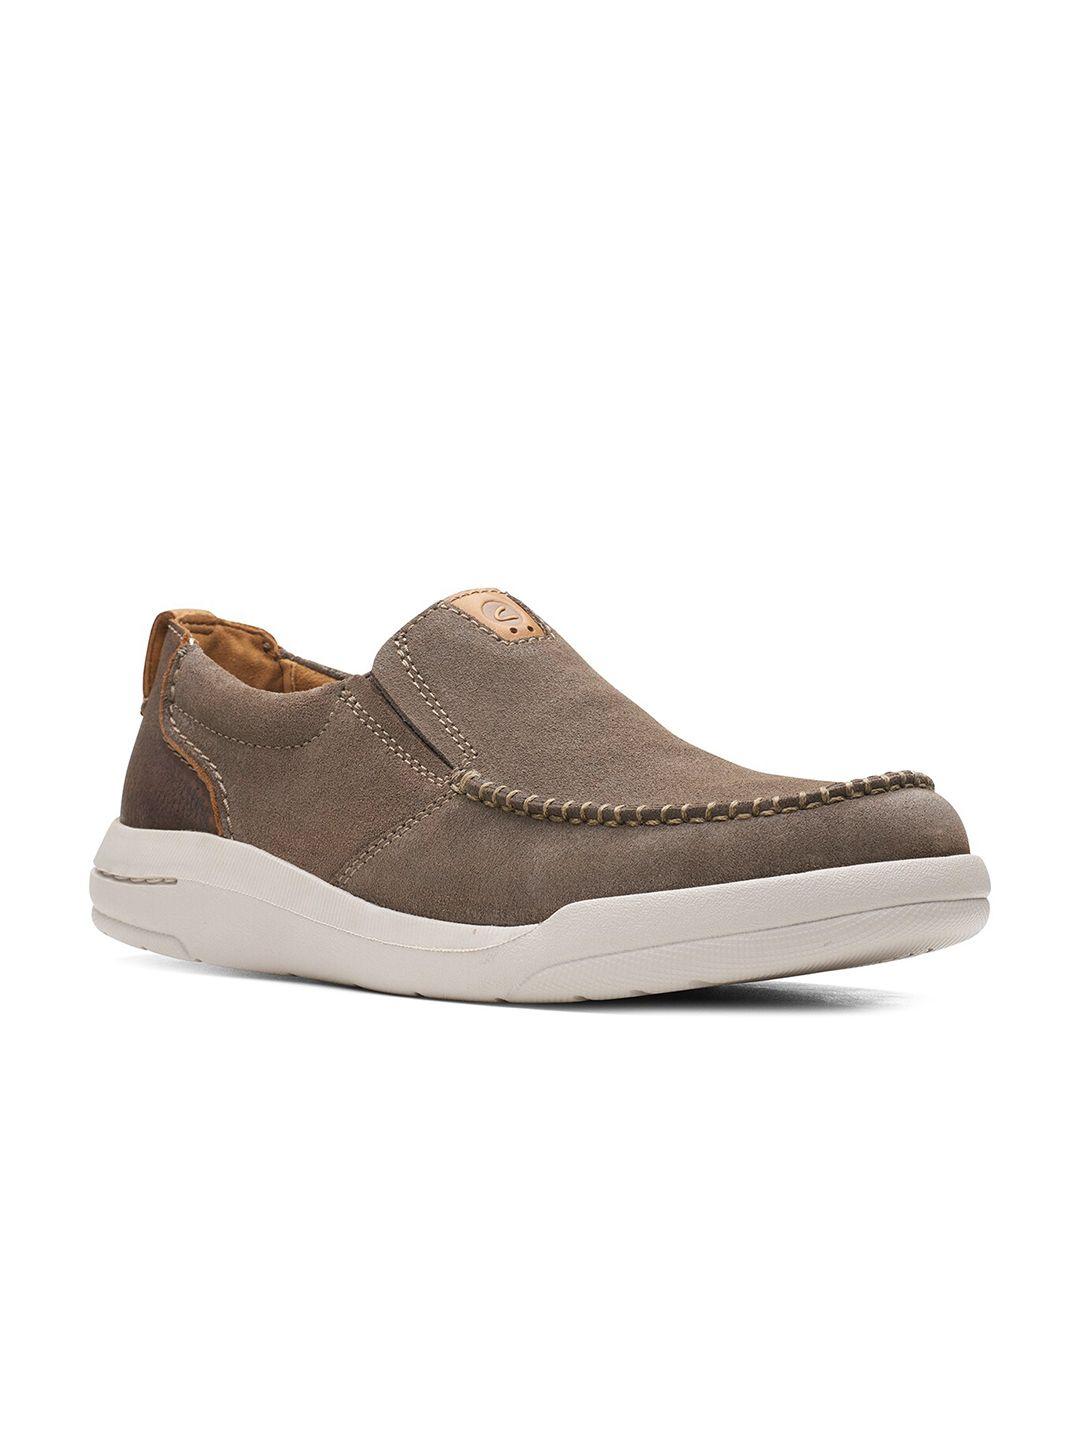 clarks men taupe suede slip-on sneakers